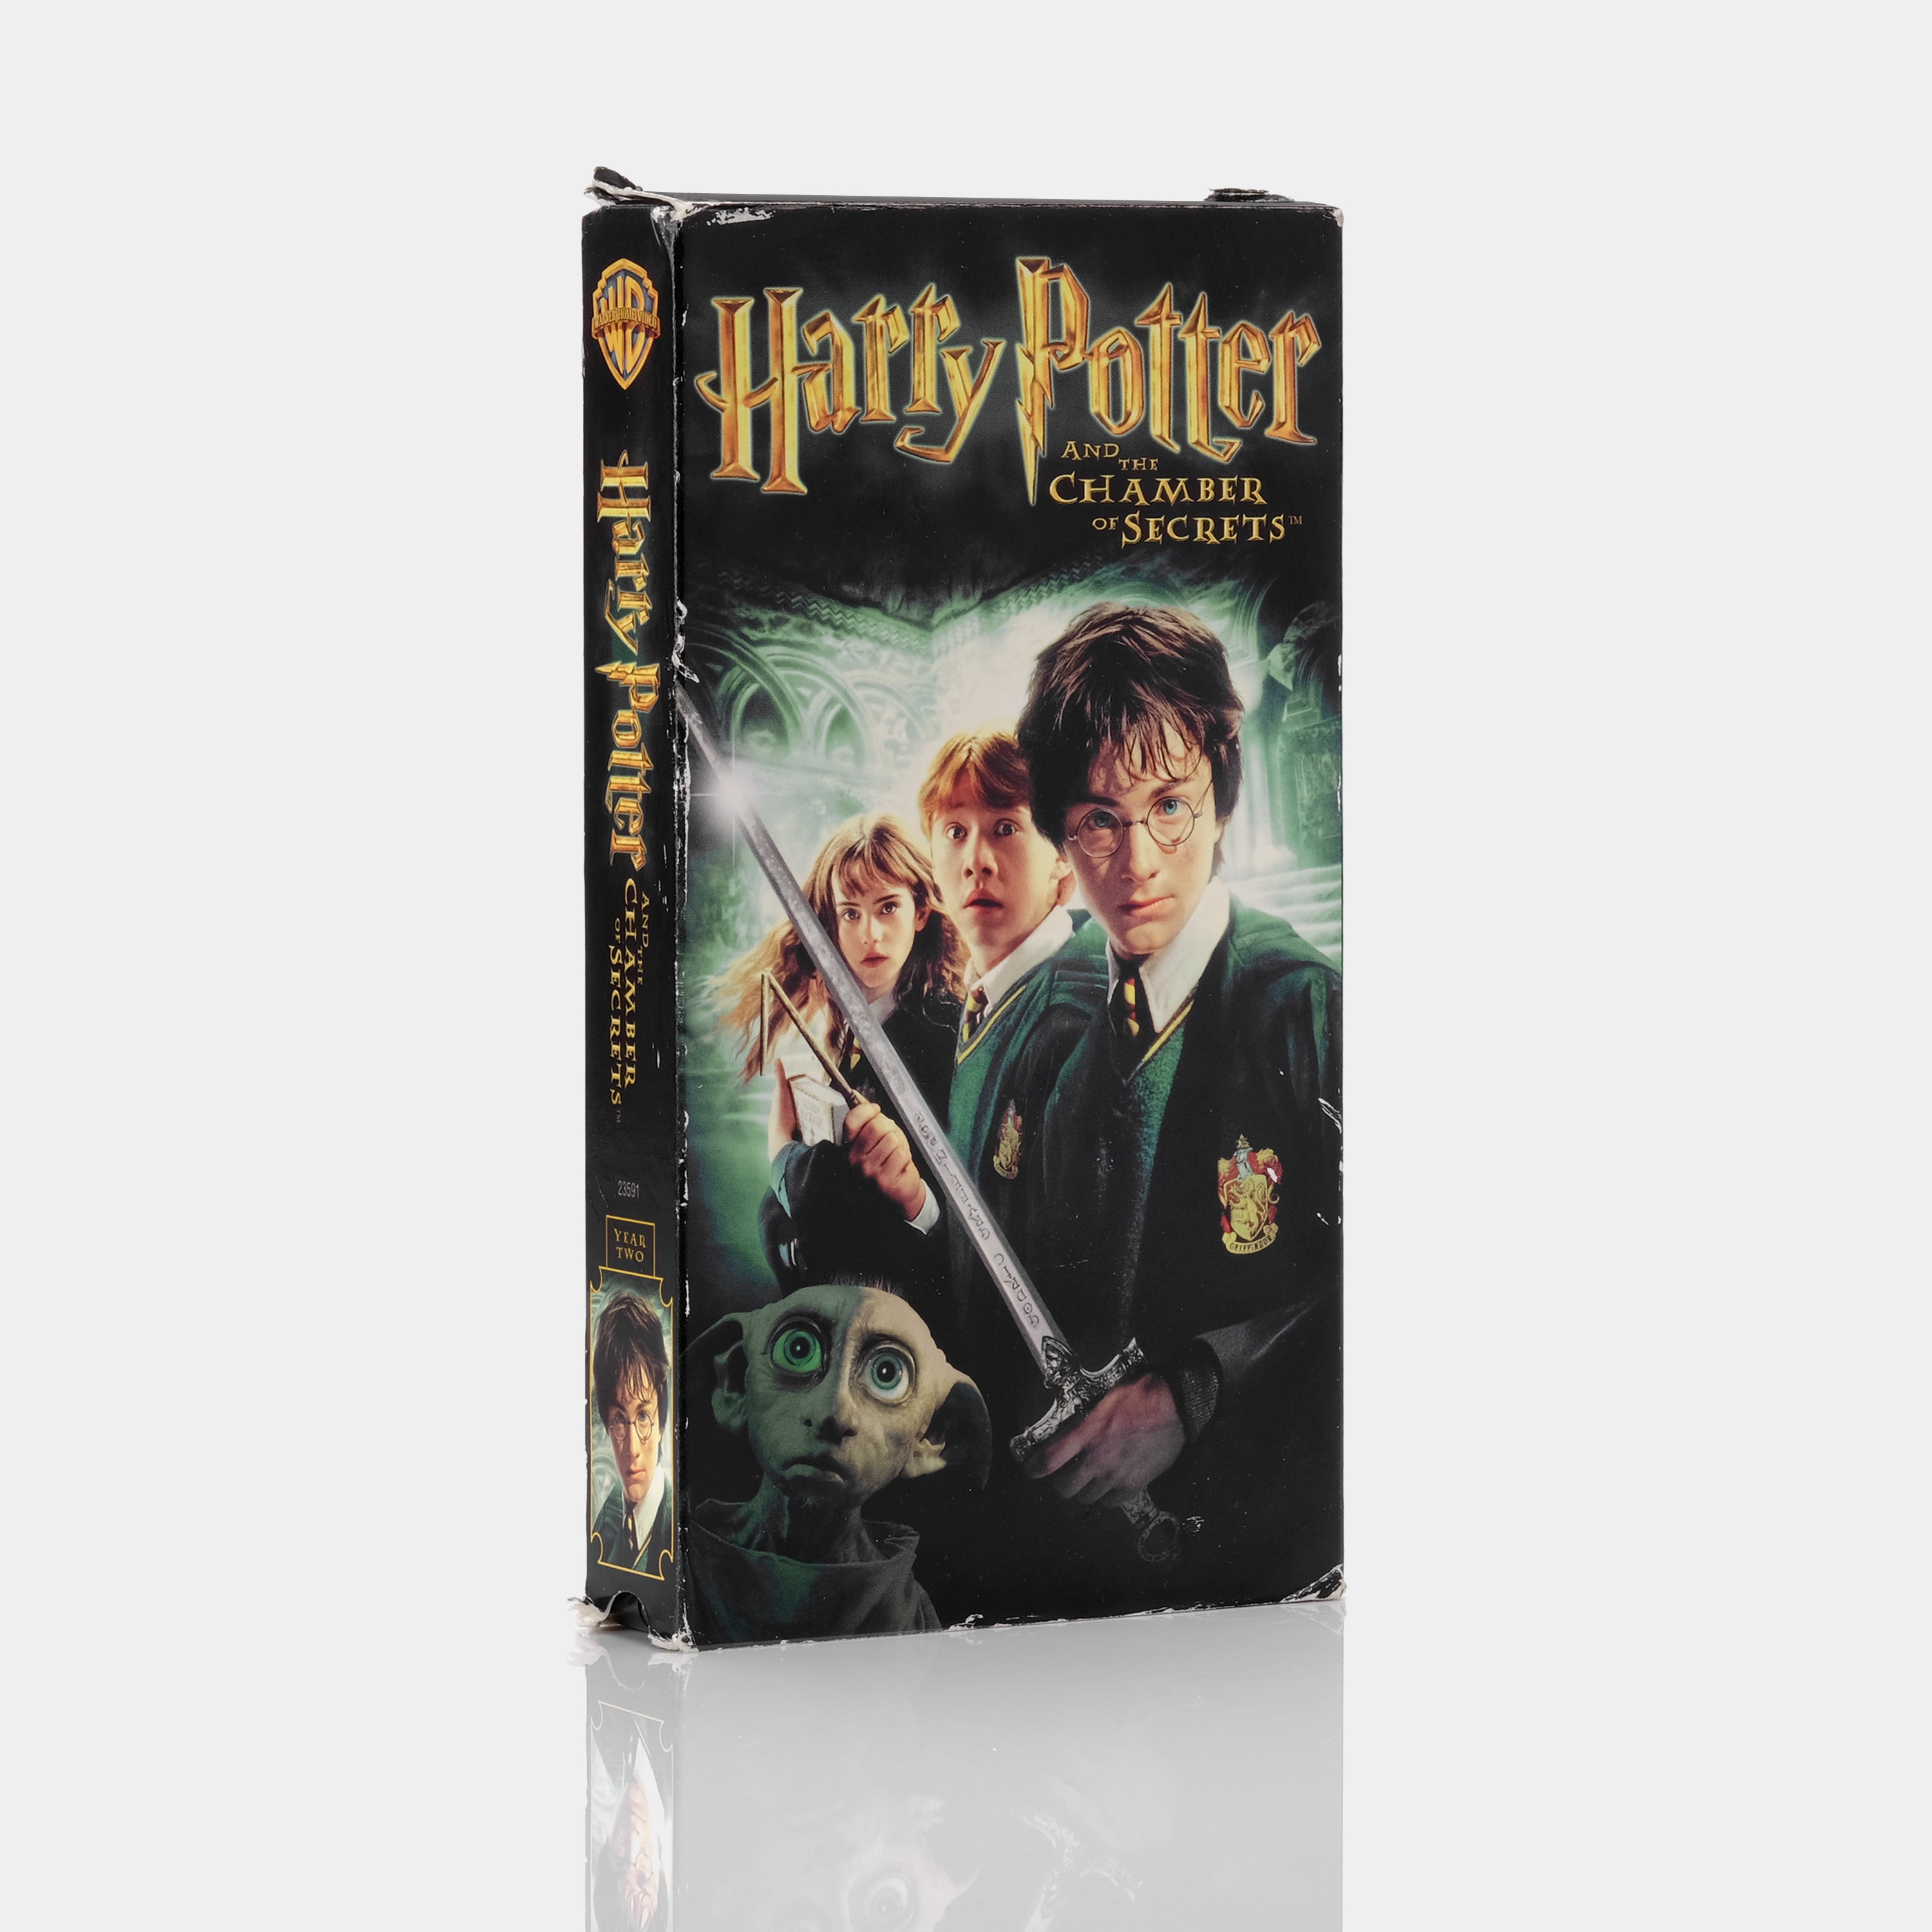 Harry Potter and the Chamber of Secrets VHS Tape